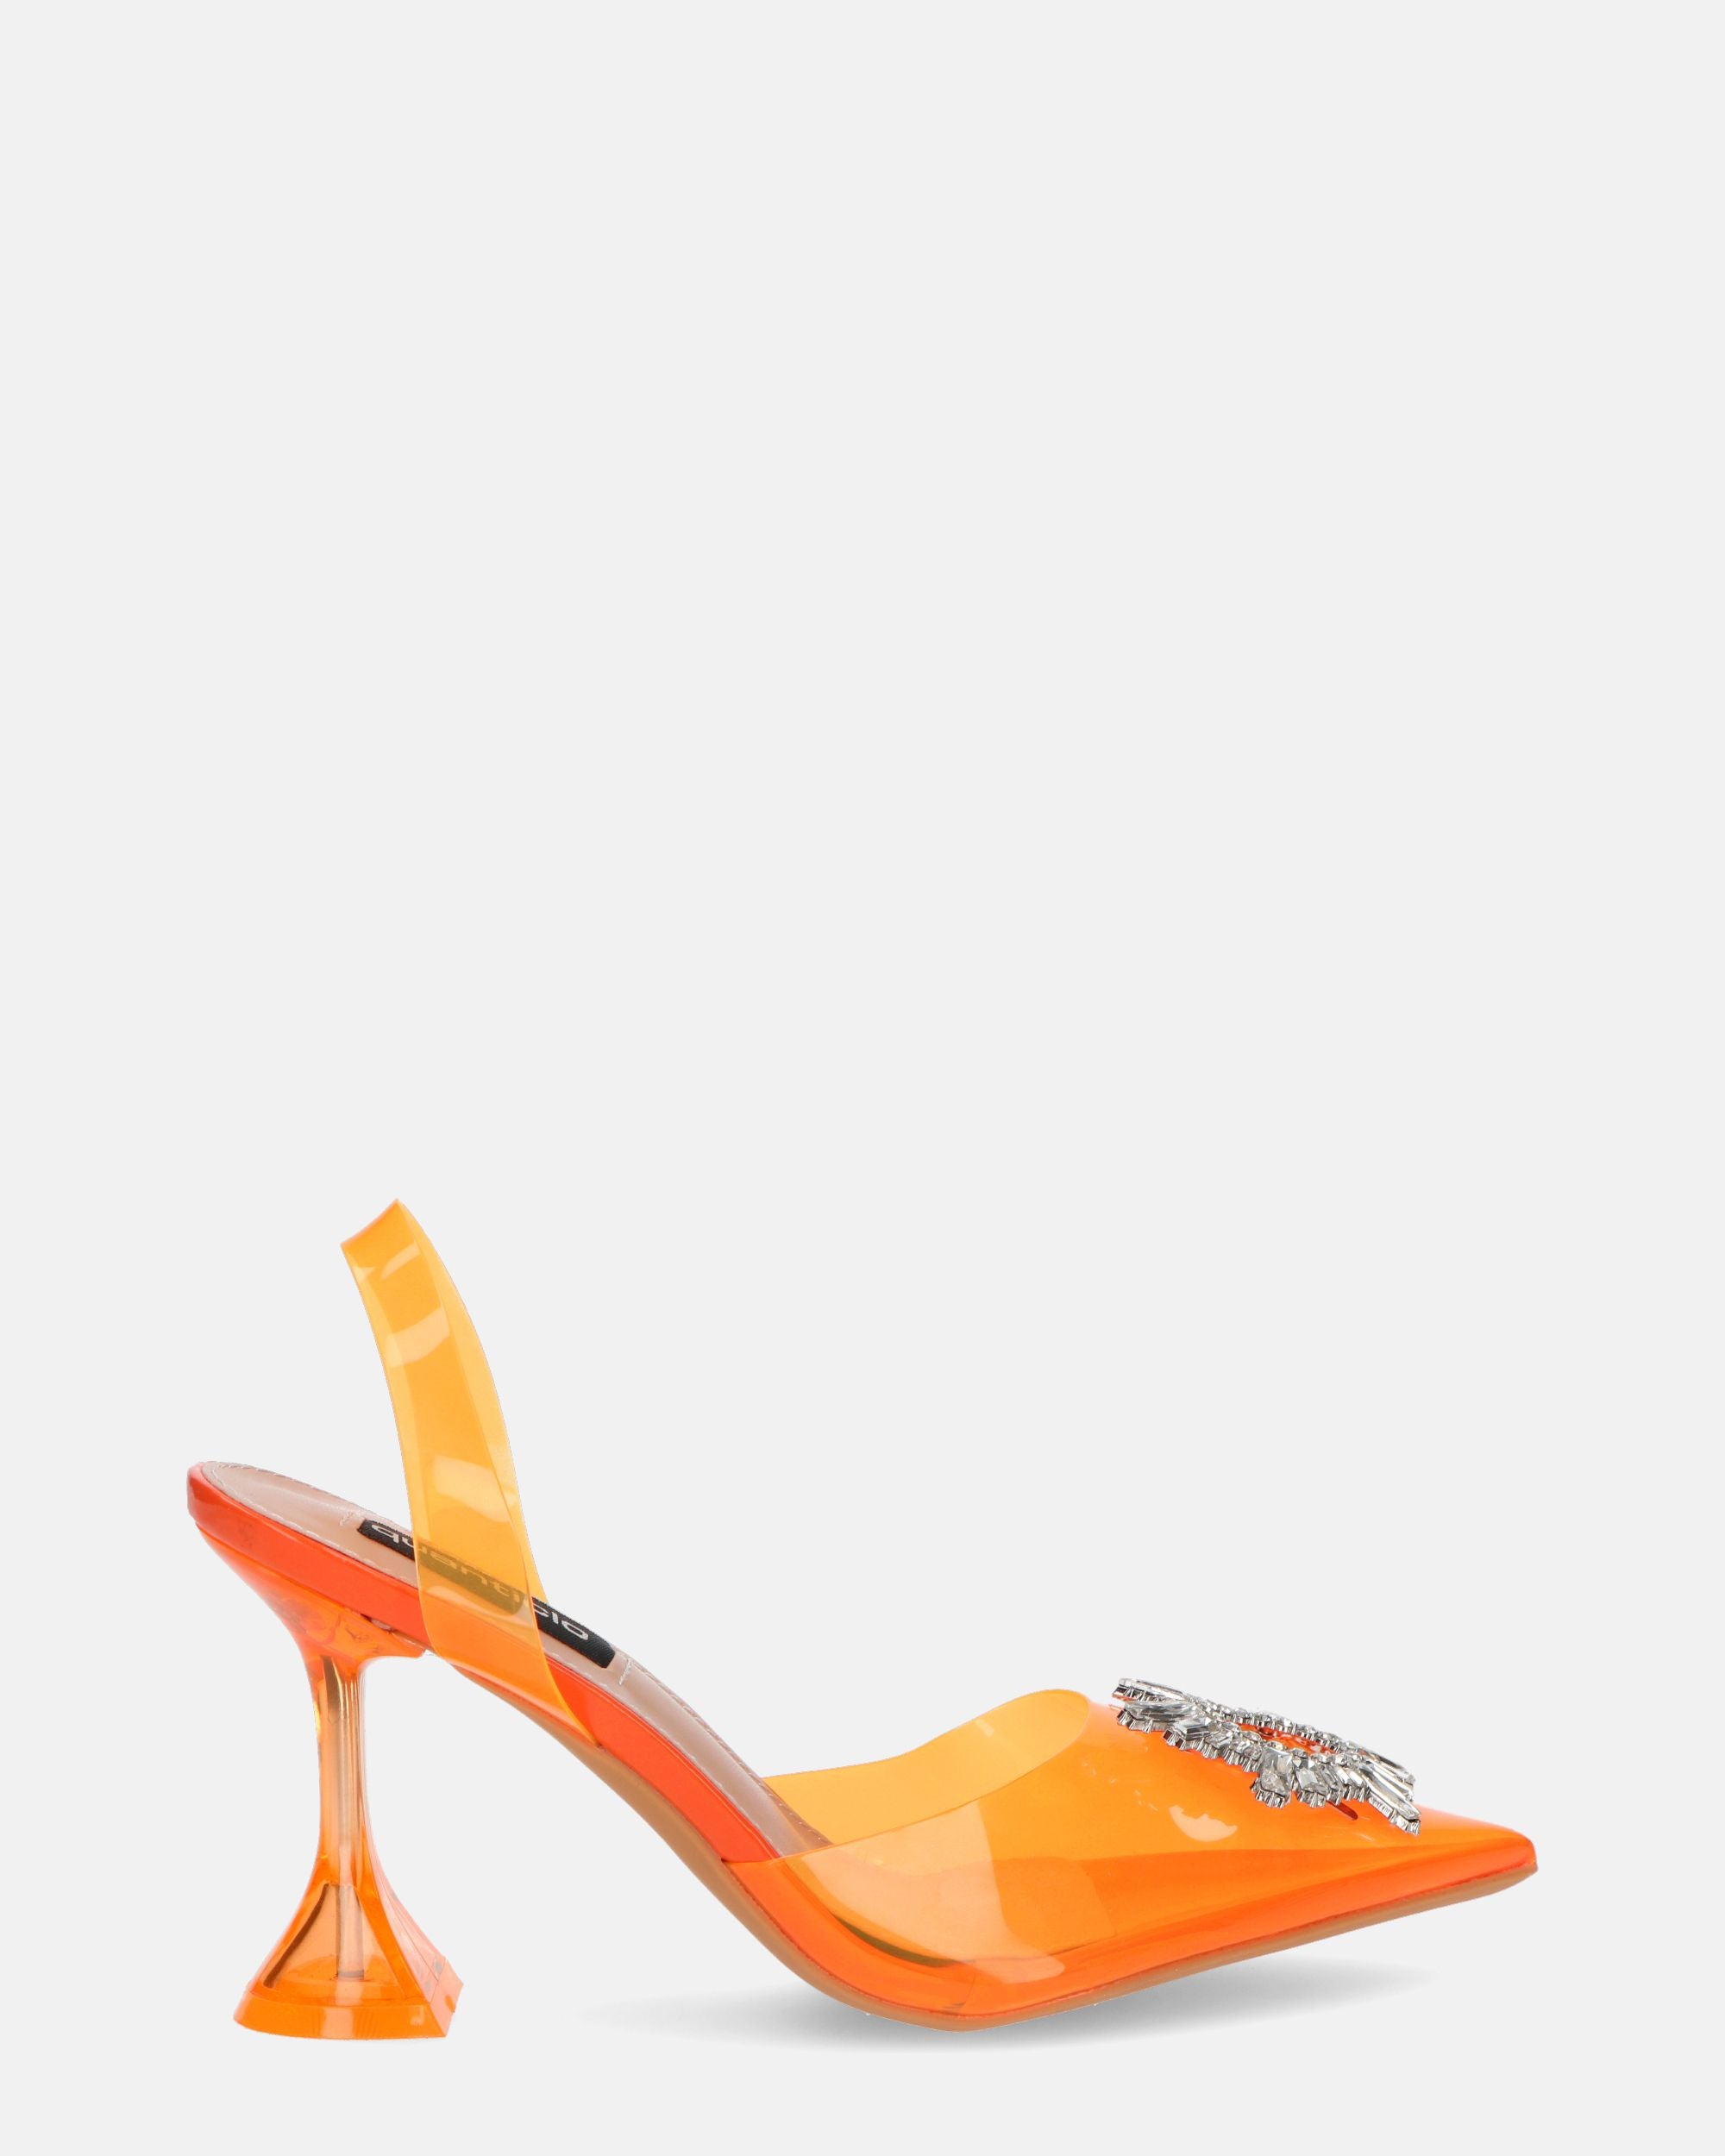 KENAN - orange perspex shoes with gemstone decoration on the toe